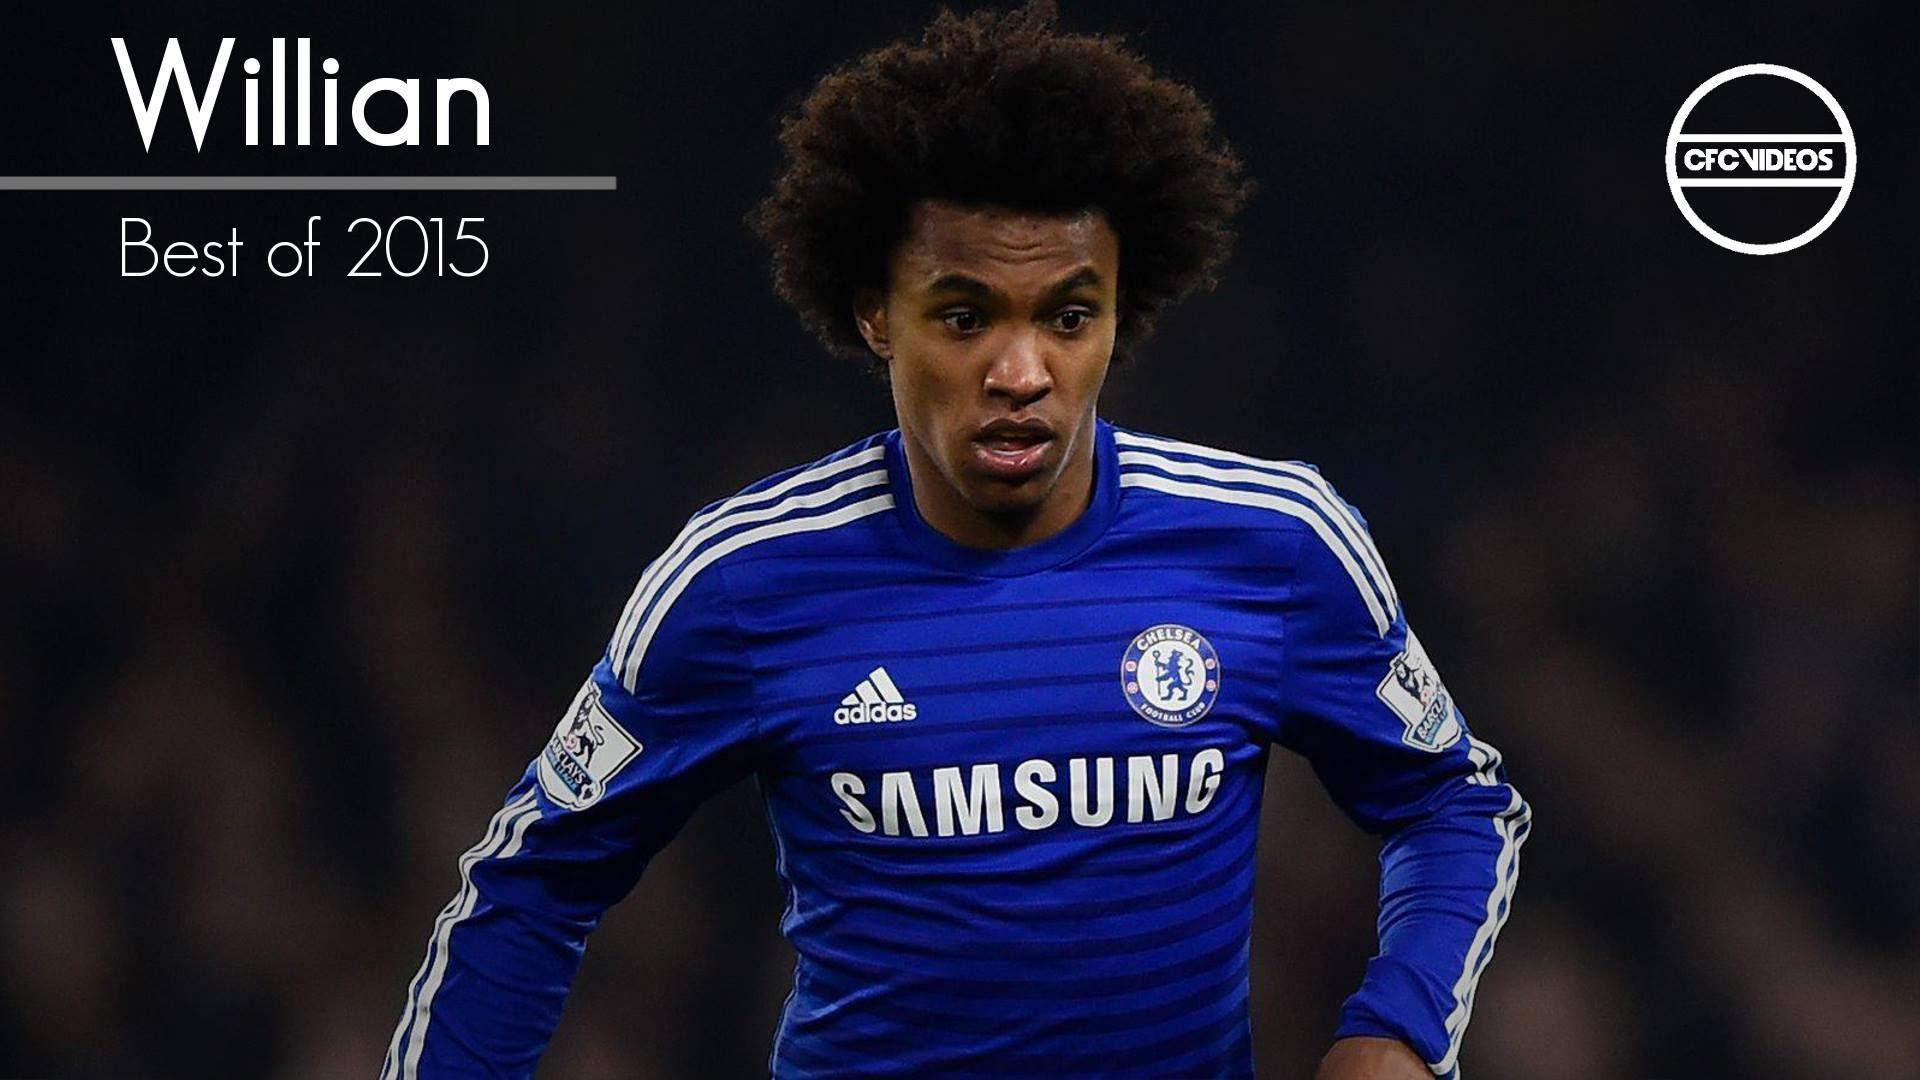 Chelsea Best Player Willian Wallpaper: Players, Teams, Leagues